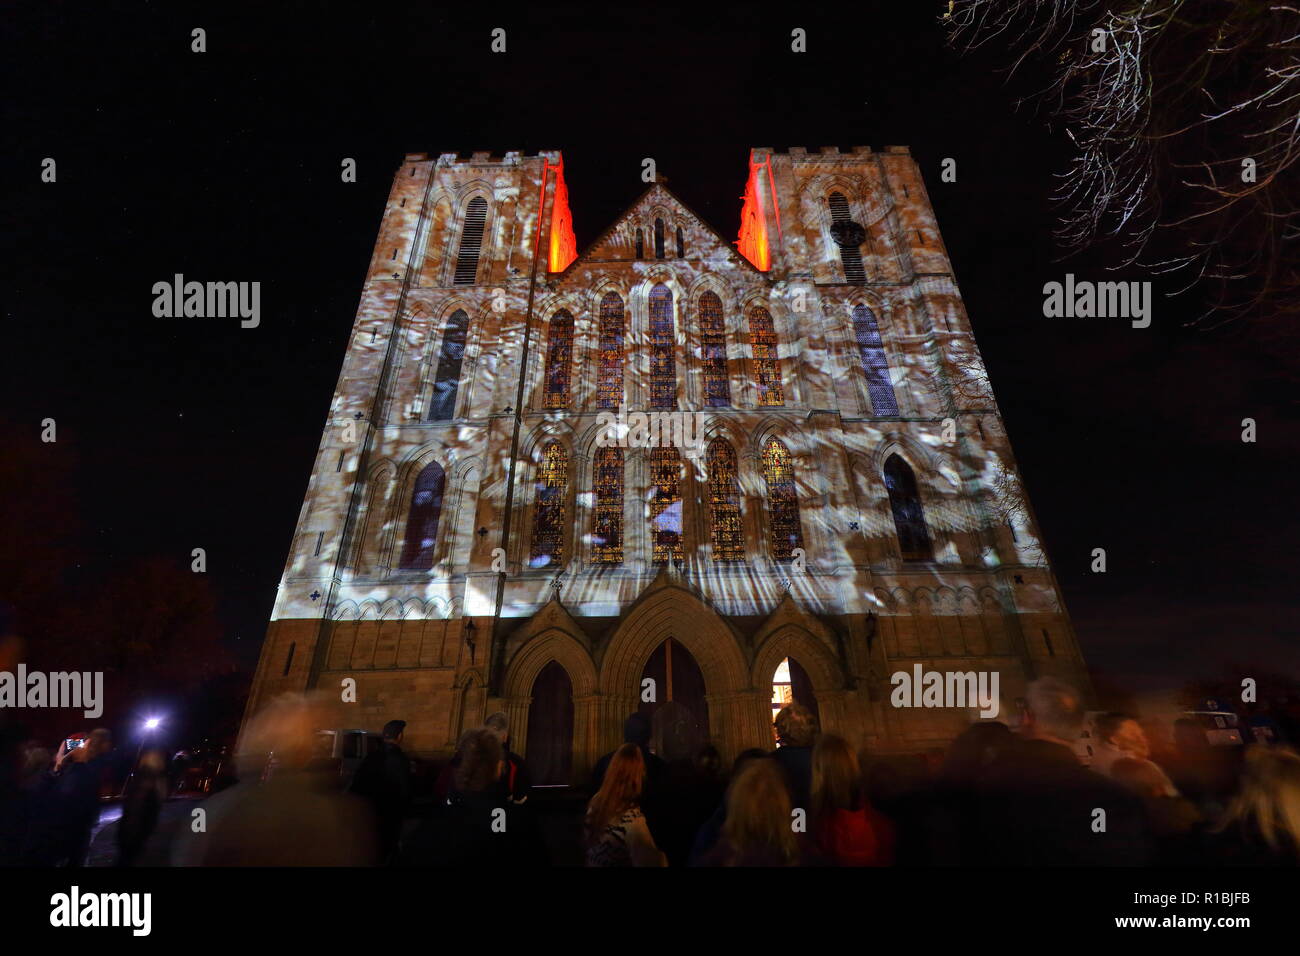 Ripon,North Yorkshire,UK. 10th November 2018. Ripon Cathedral puts on an illuminated projection display to mark armistice day 2018. The display shows still images from the war along with names of some of those who lost their lives. Animated poppies also cascade down the face of the cathedral where 1000's gathered to watch the final showing. Credit: Yorkshire Pics/Alamy Live News Stock Photo